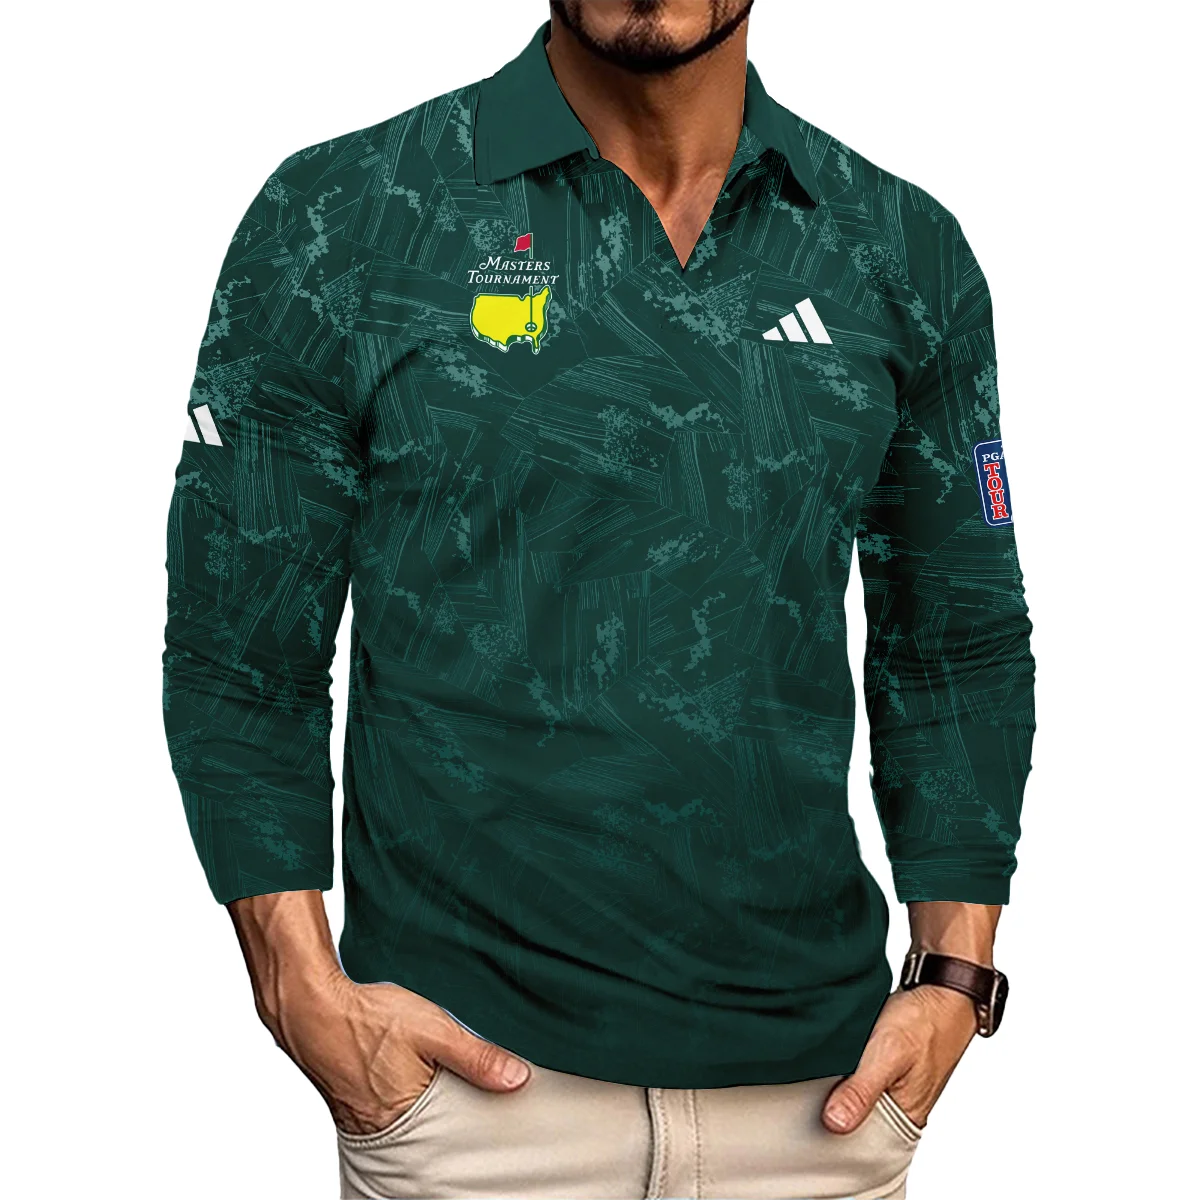 Dark Green Background Masters Tournament Adidas Vneck Long Polo Shirt Style Classic Long Polo Shirt For Men